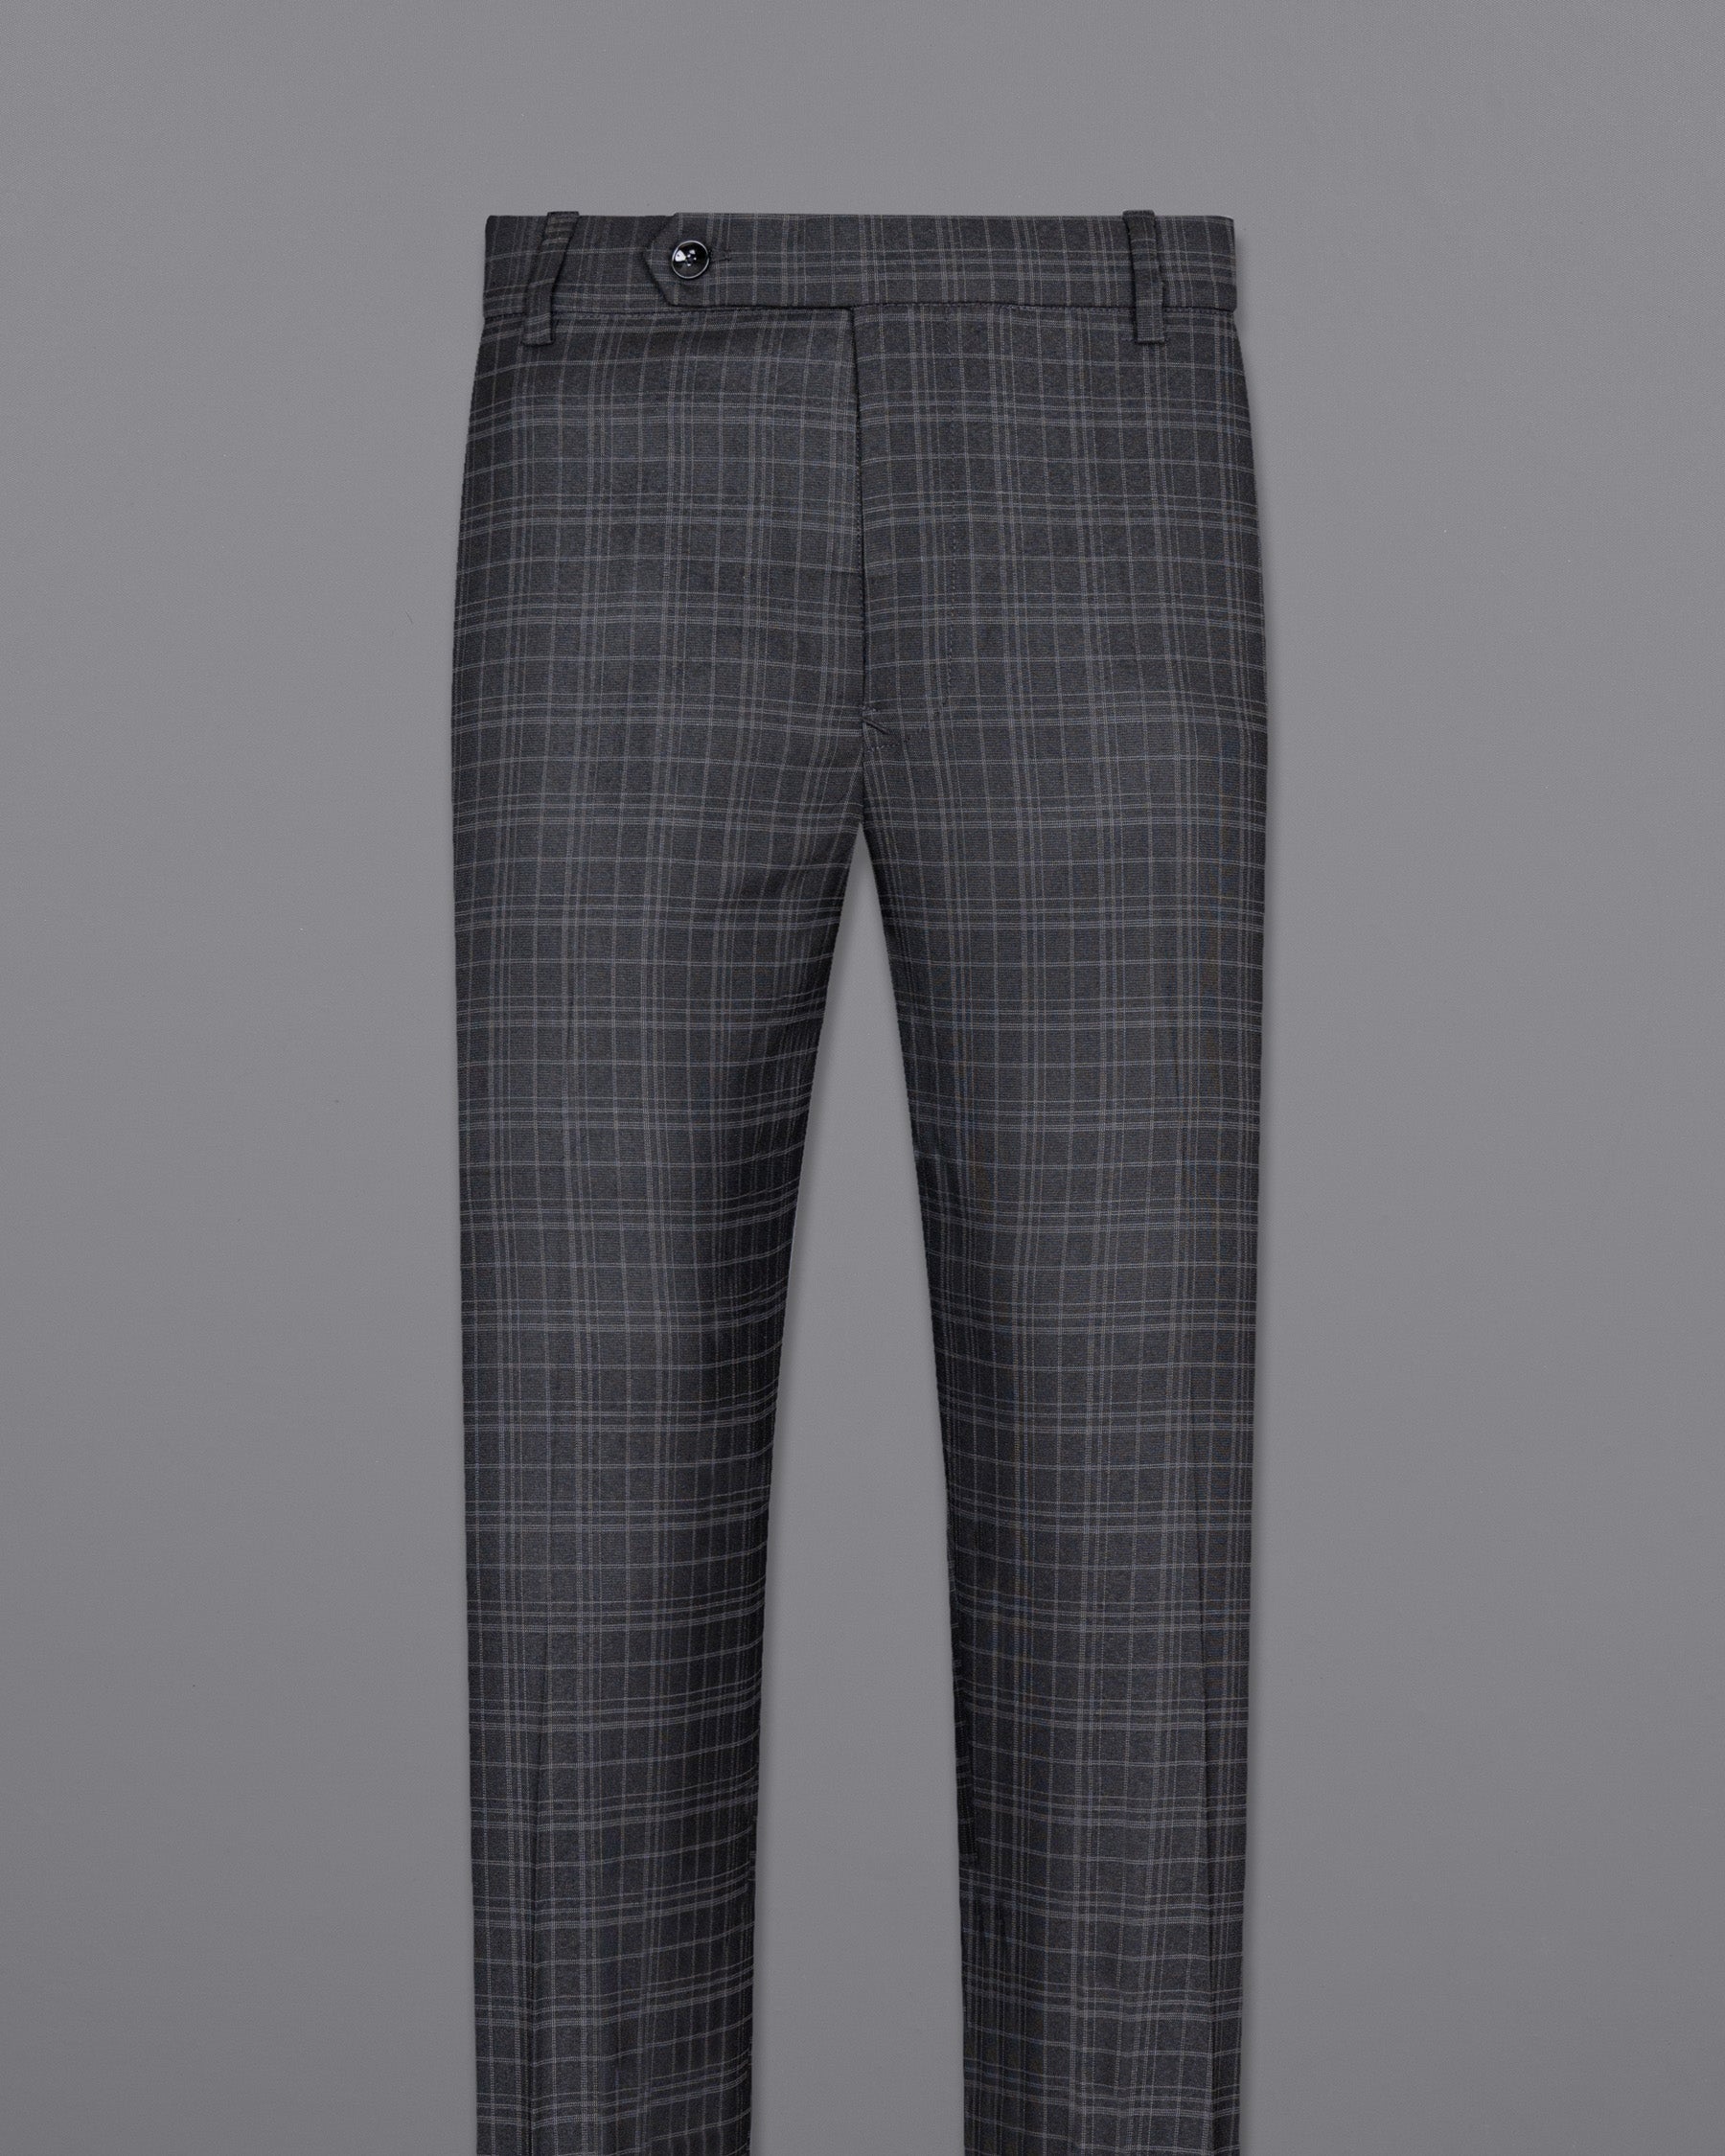 Star Dust and Shark Grey Plaid Cross Placket Bandhgala Wool rich Suit